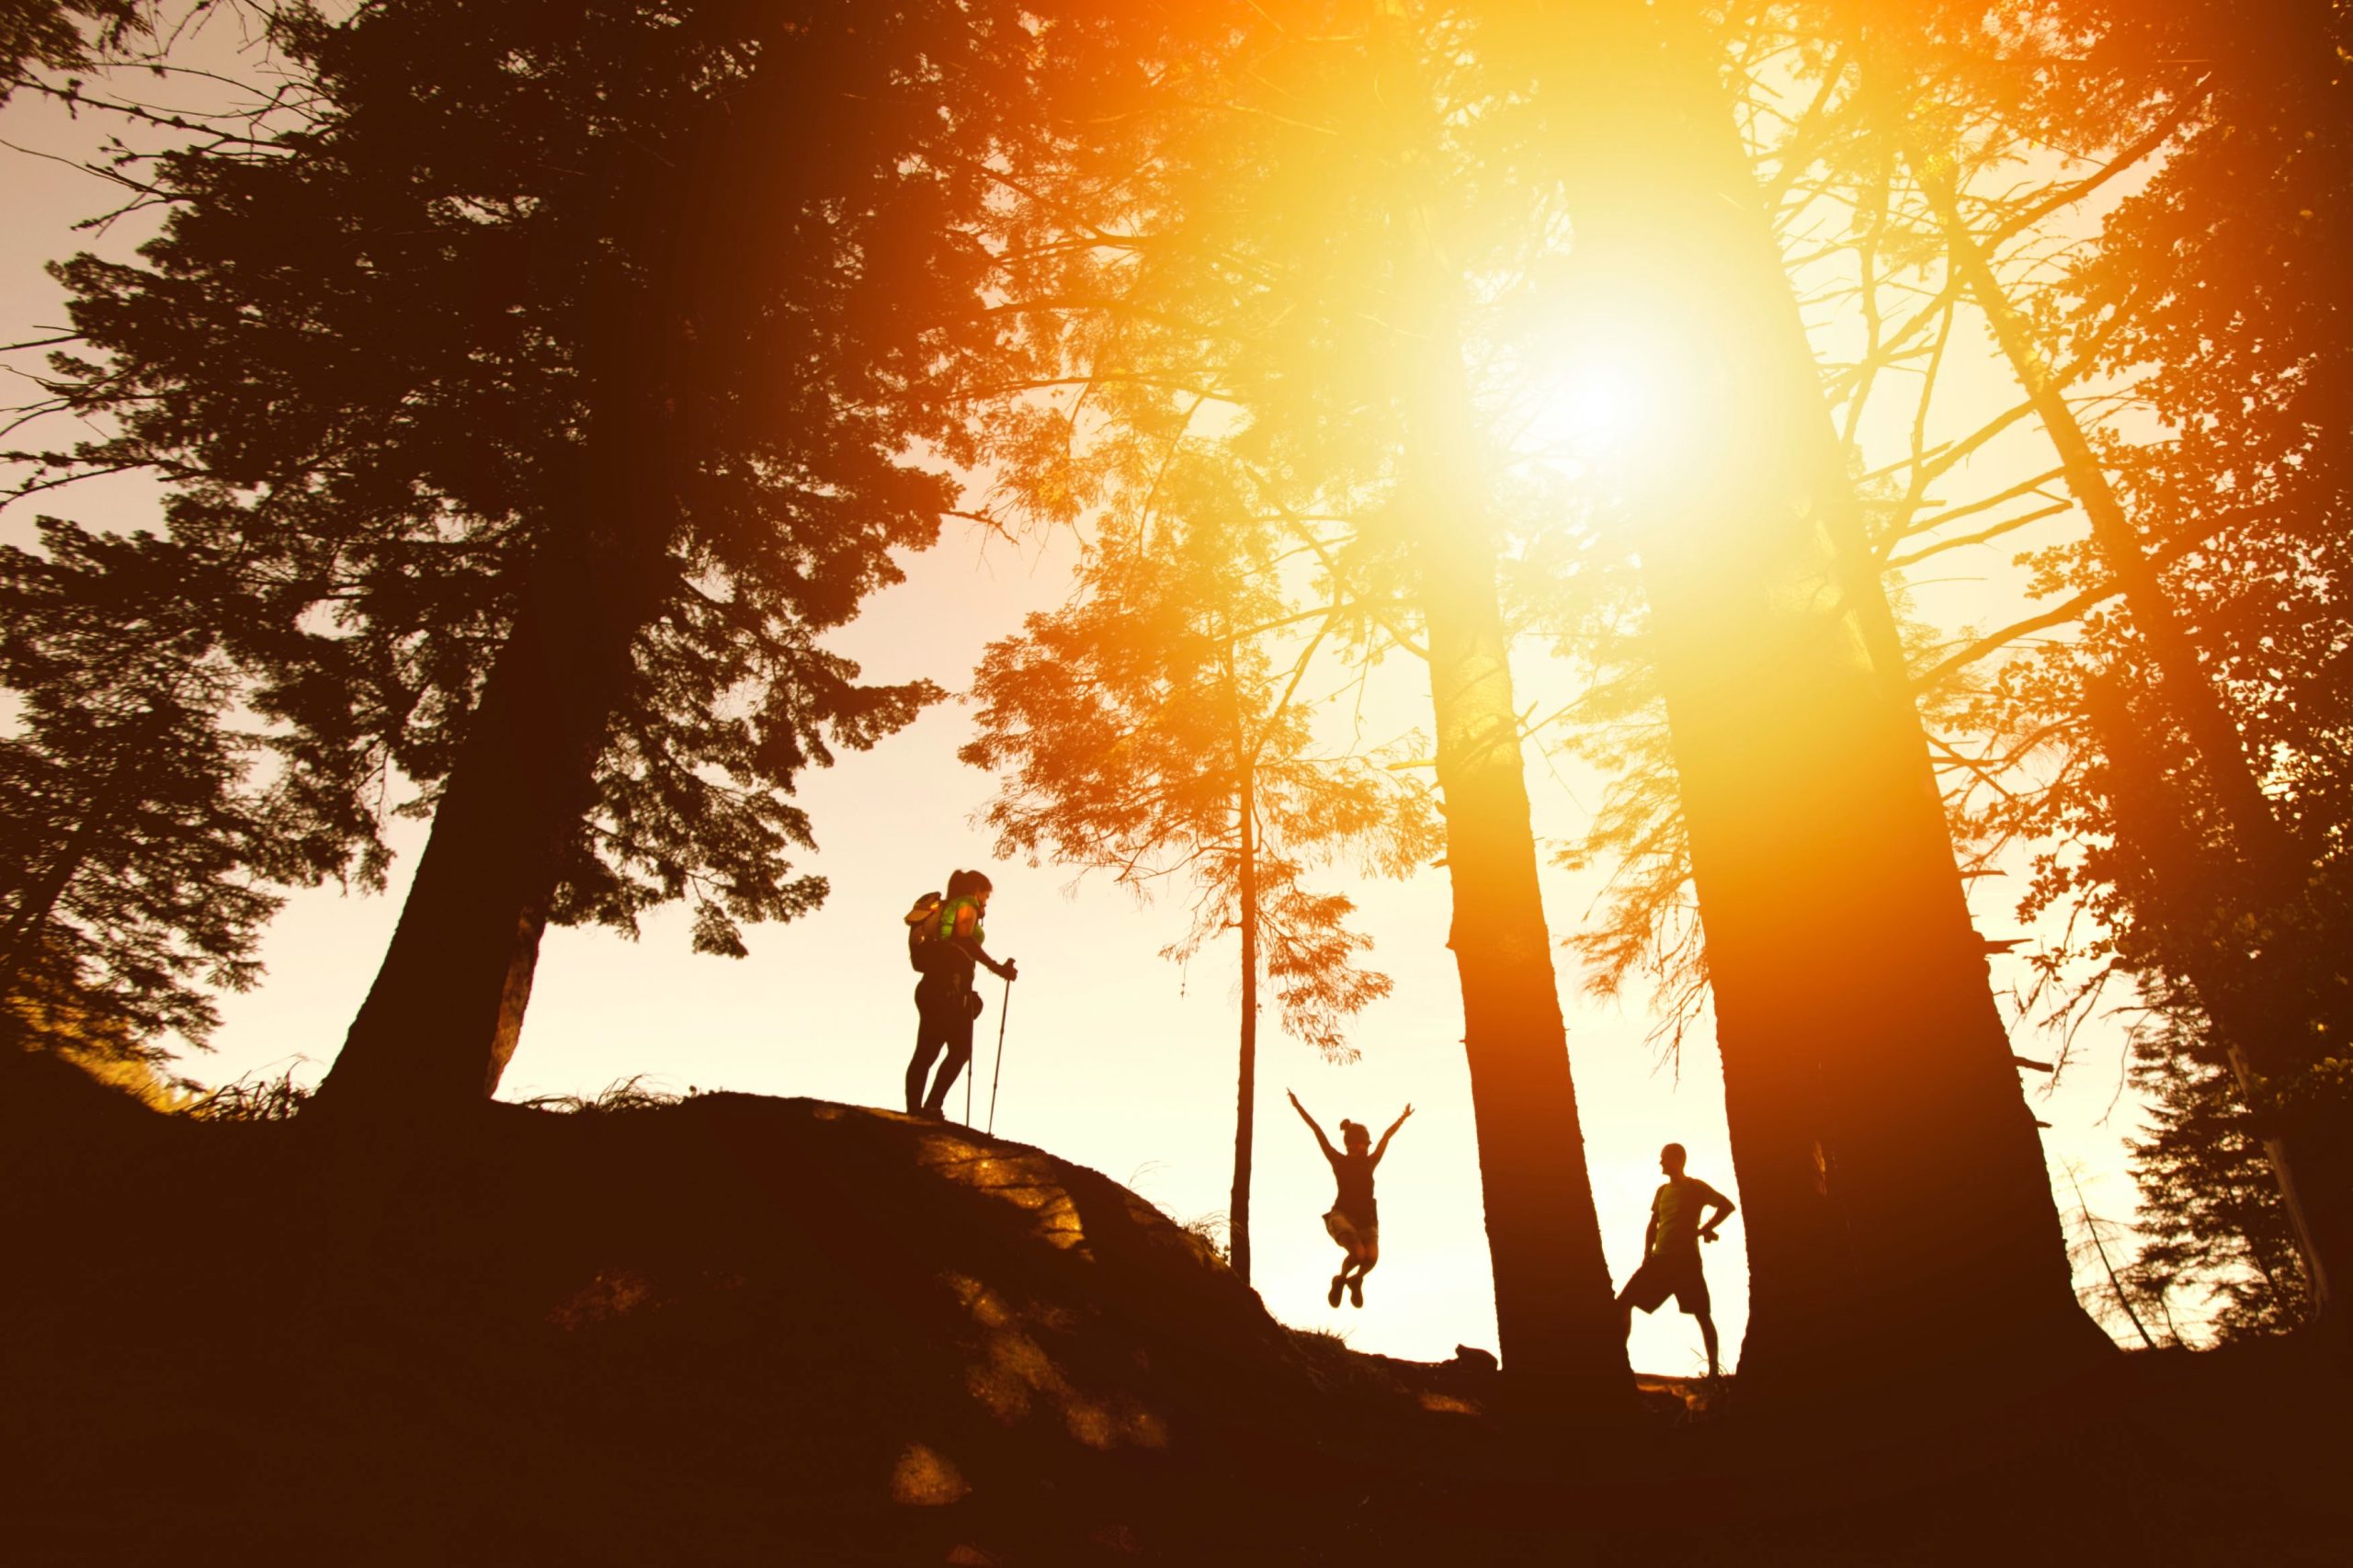 A photo of three people hiking in the forest, backlit by the sun.